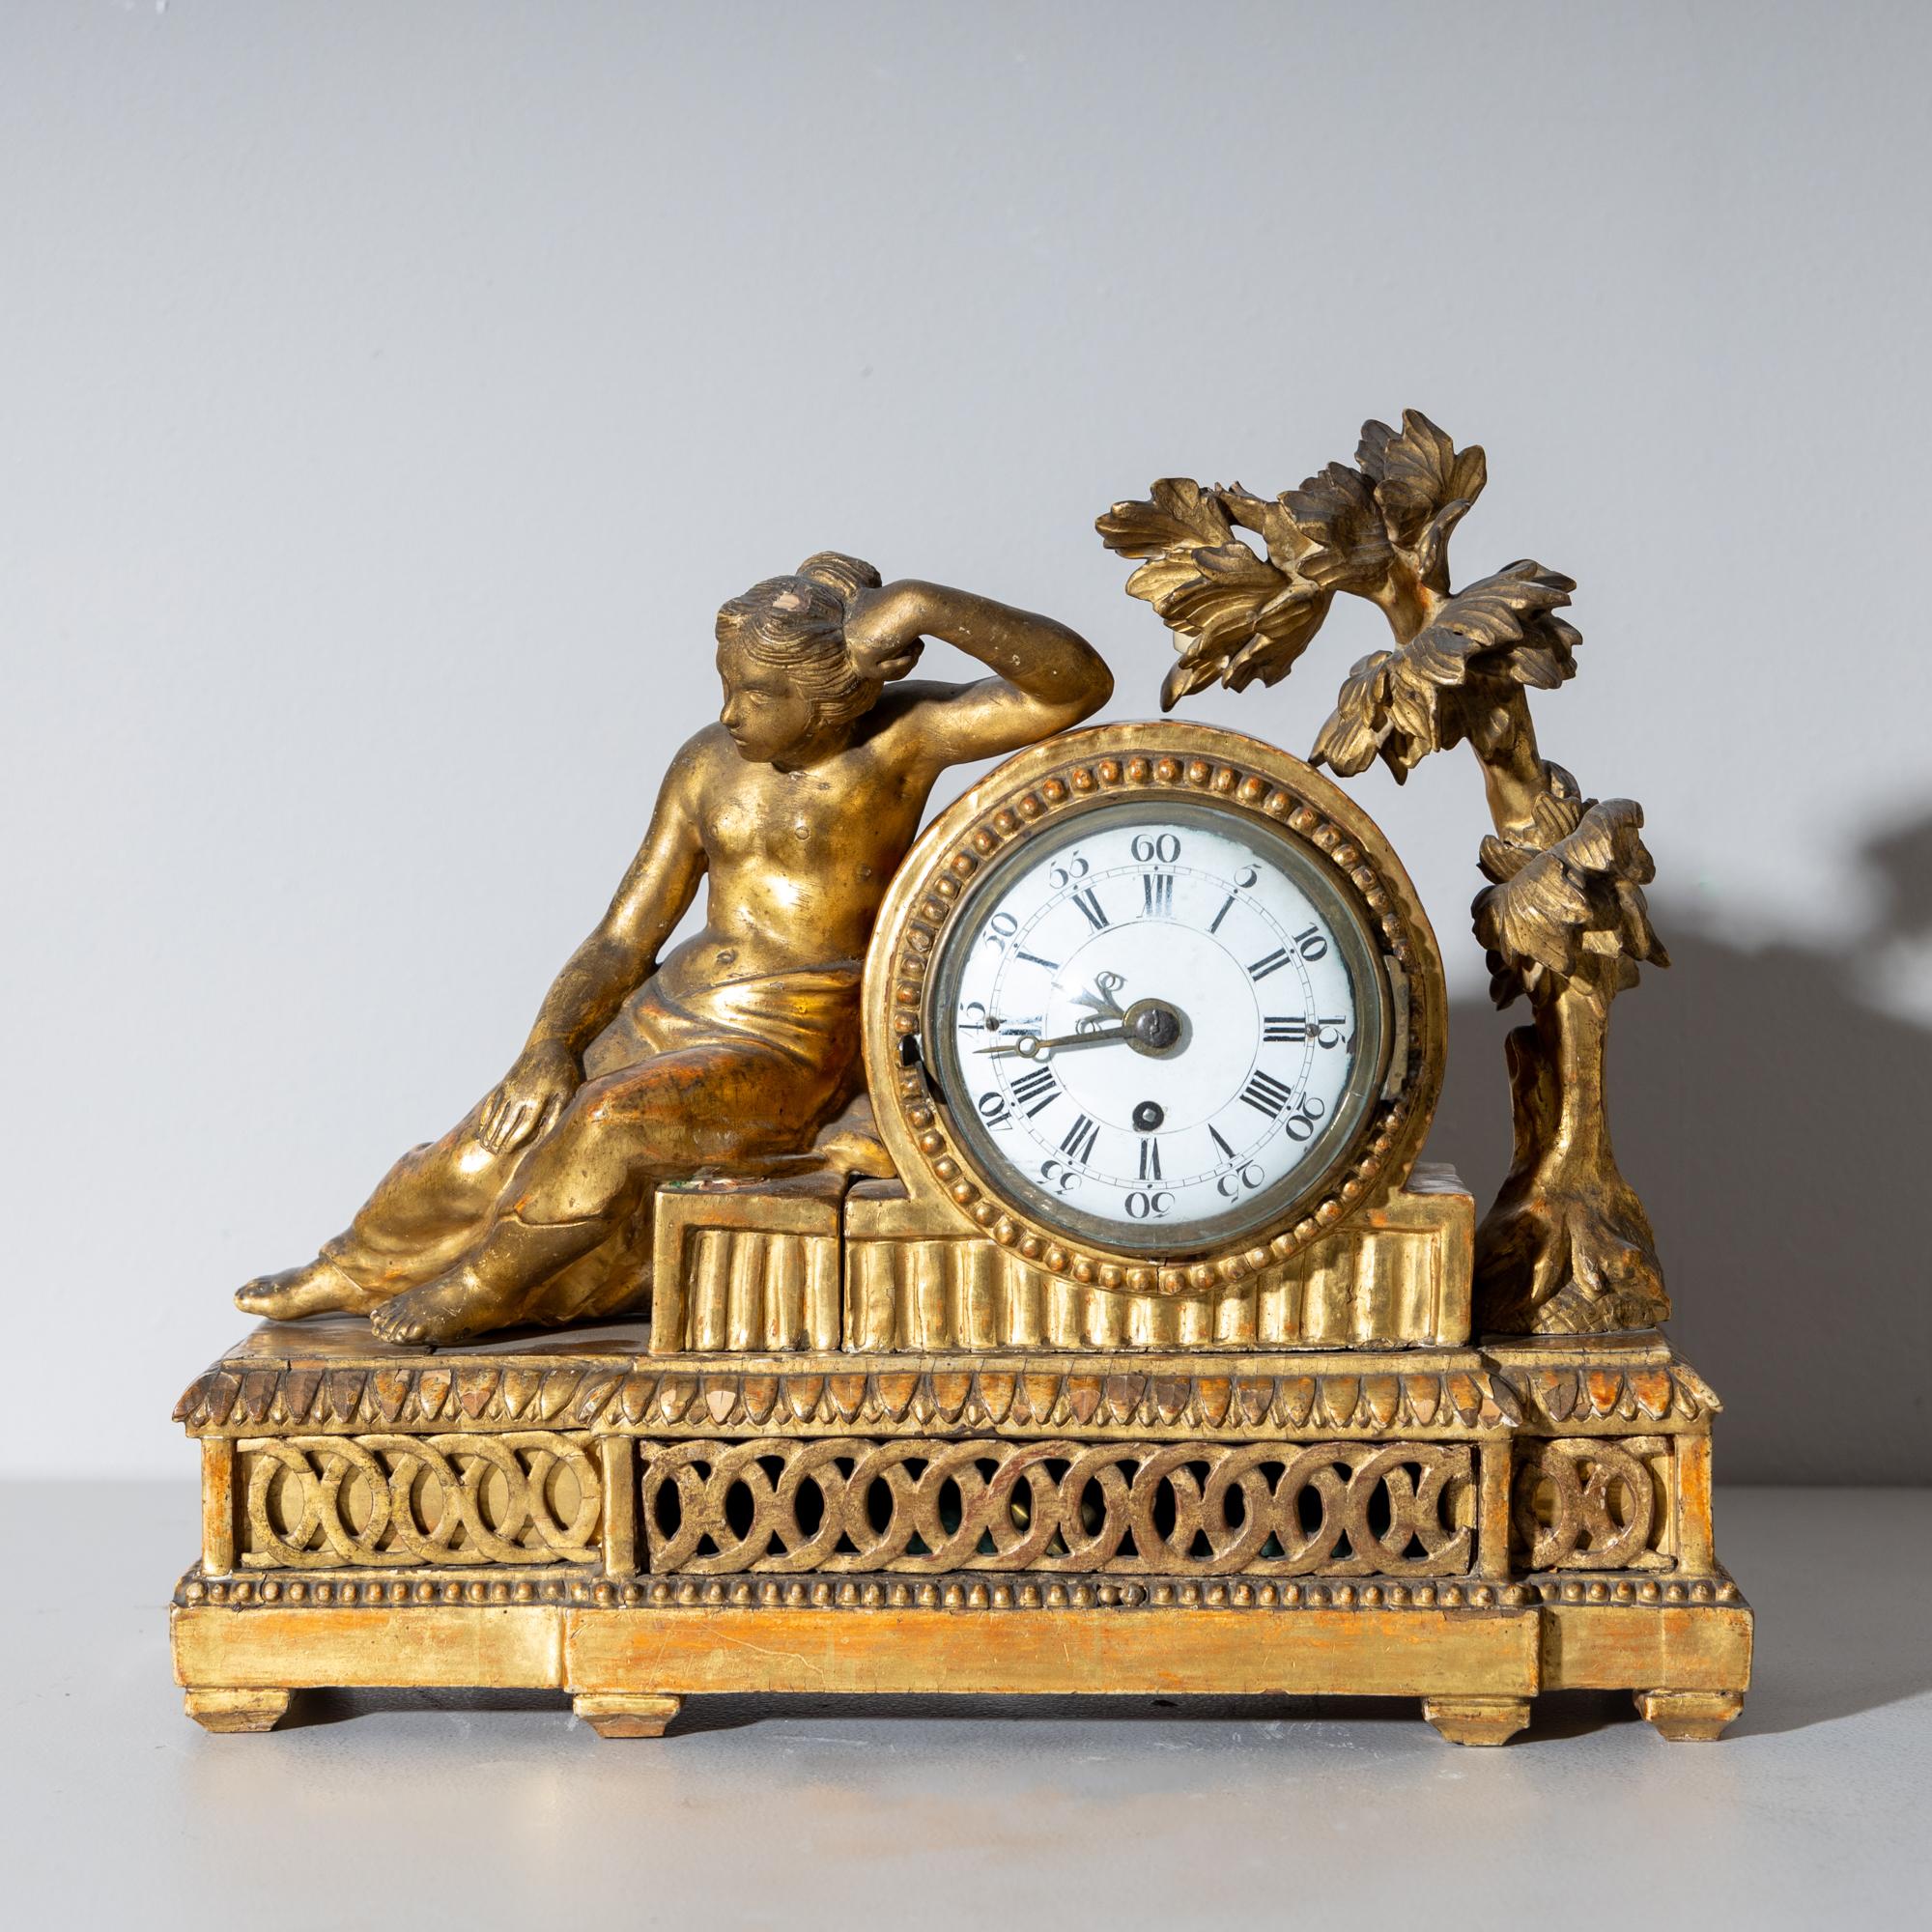 Louis Seize mantel clock or pendule, housed in a gold-patinated wooden case featuring intricate openwork rings and a round clock case. The design depicts a young undressed woman leaning against it, with a tree on the right side providing shade. The